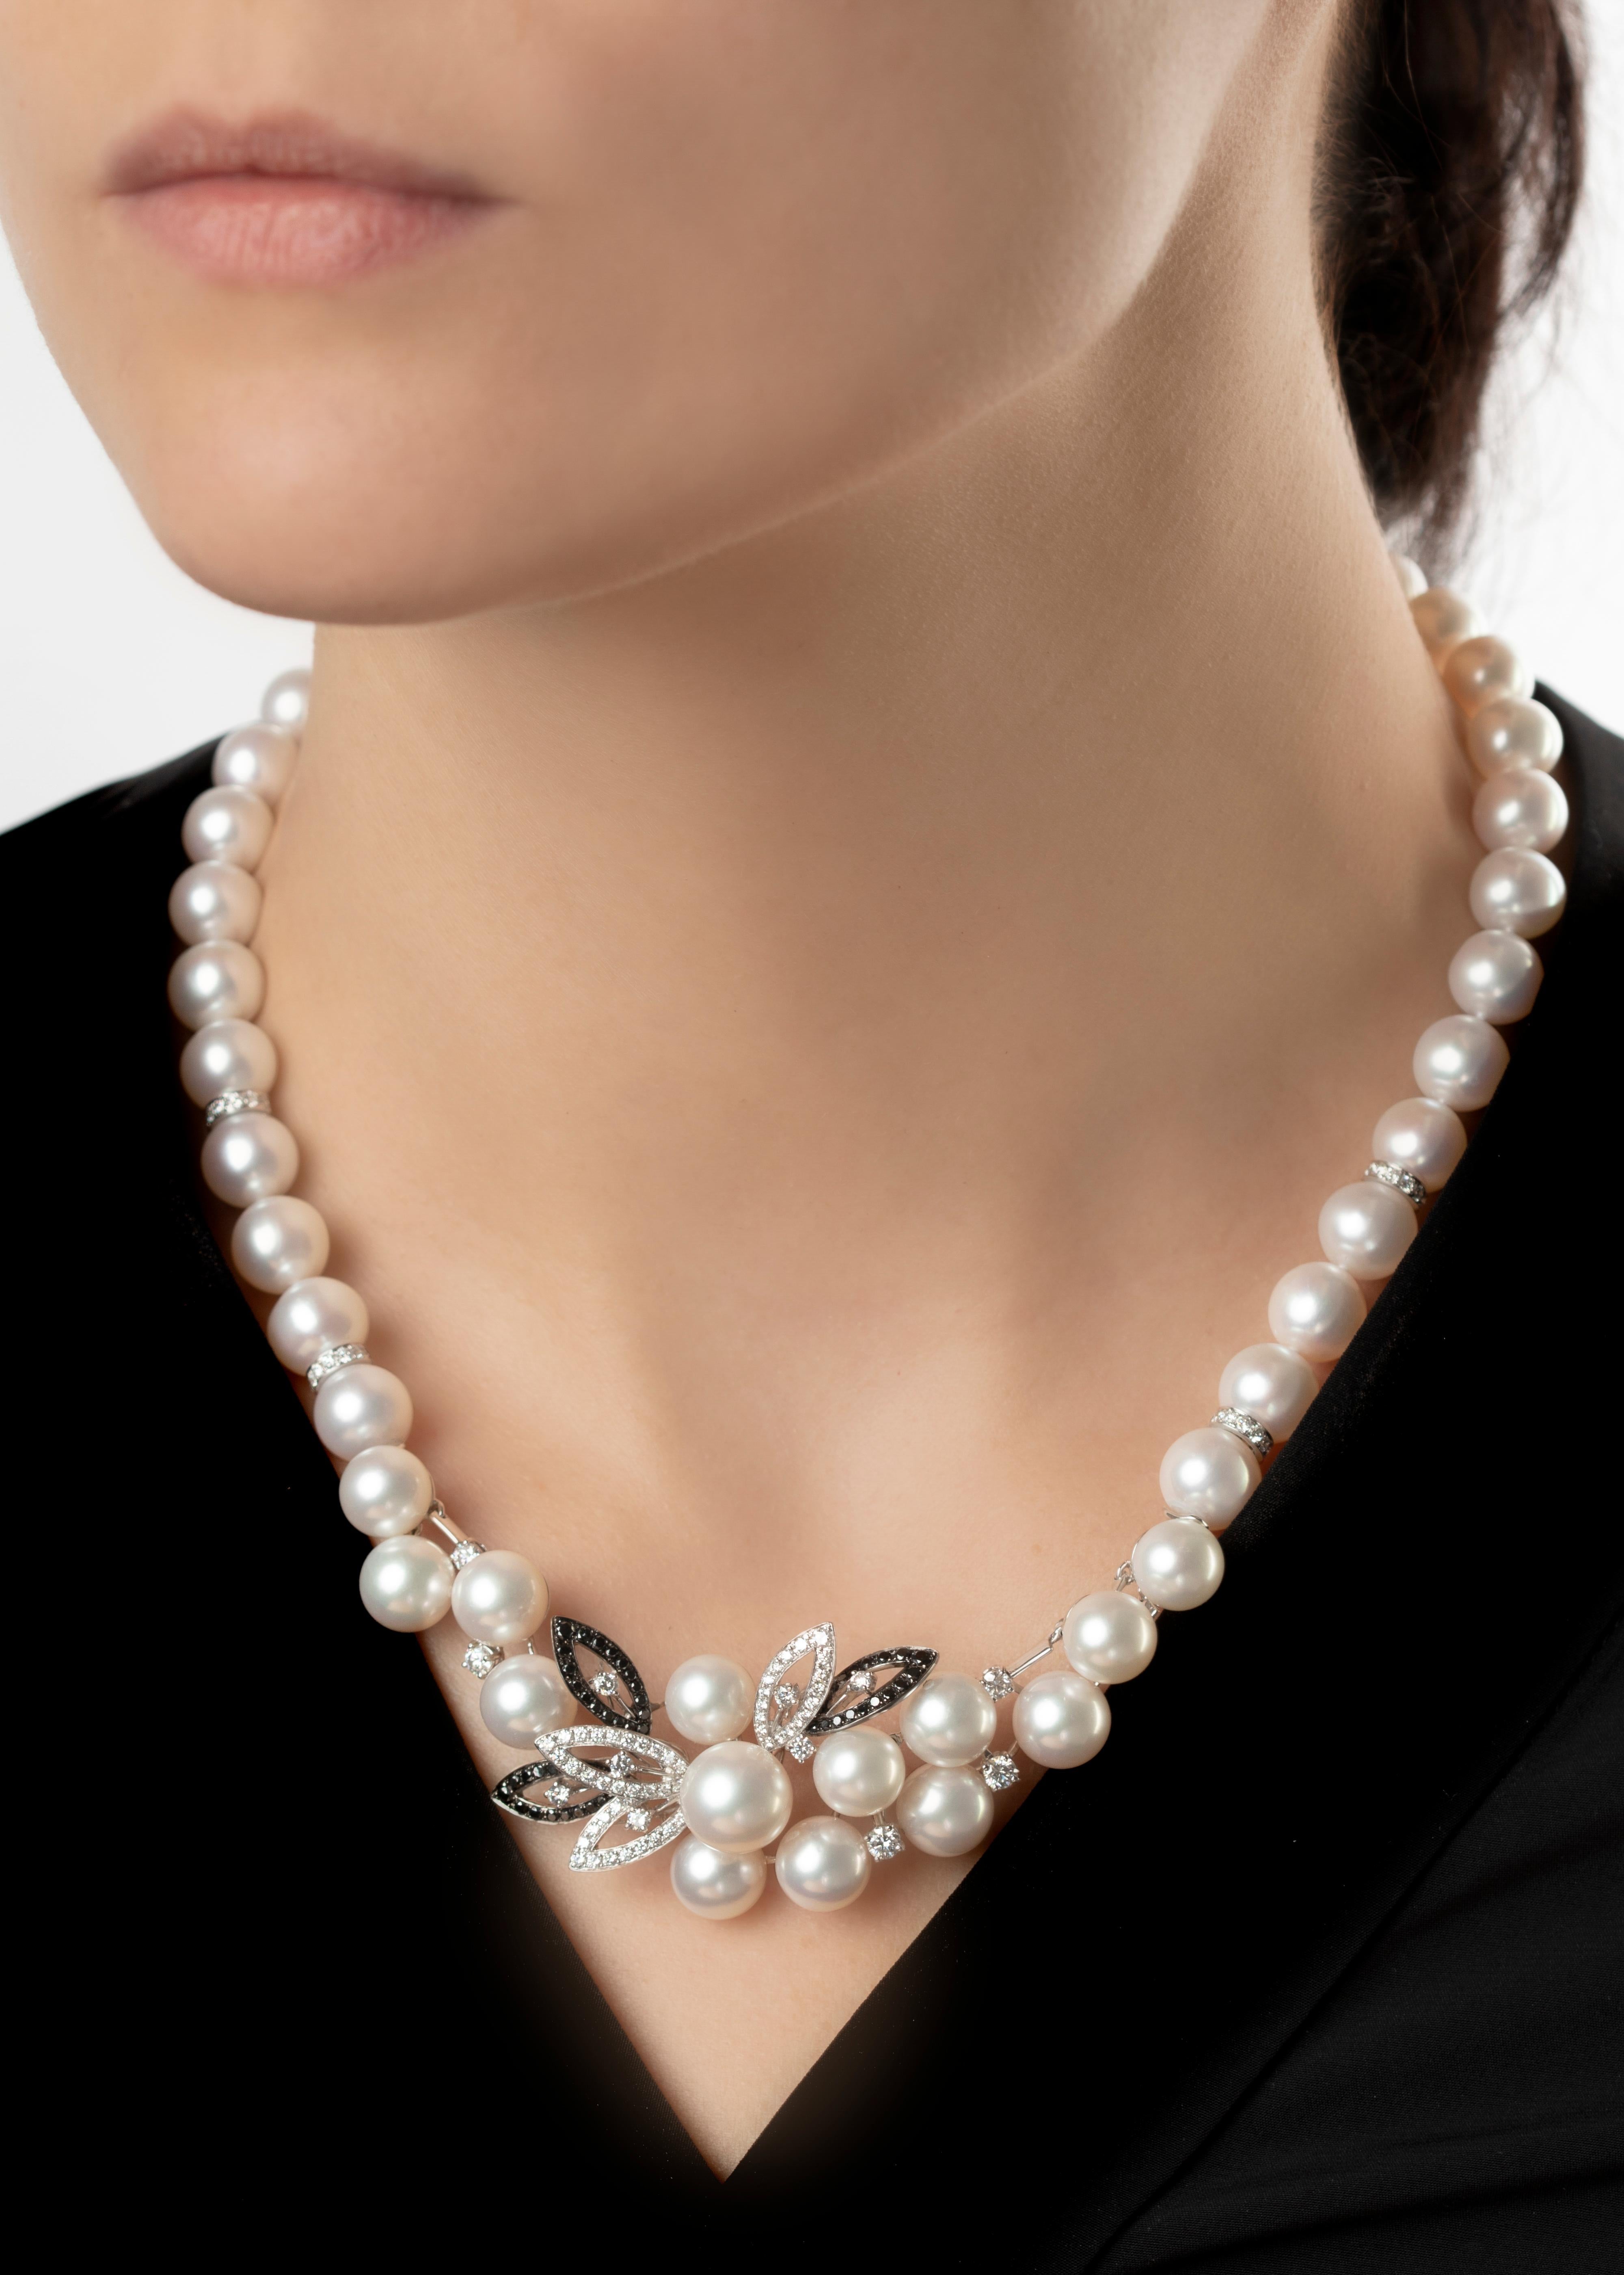 This statement necklace by Yoko London, features an elegant floral decoration at it's forefront crafted from black and white gold and finished with sparkling black and white diamonds. A polished look for both summer and winter outfits, this necklace